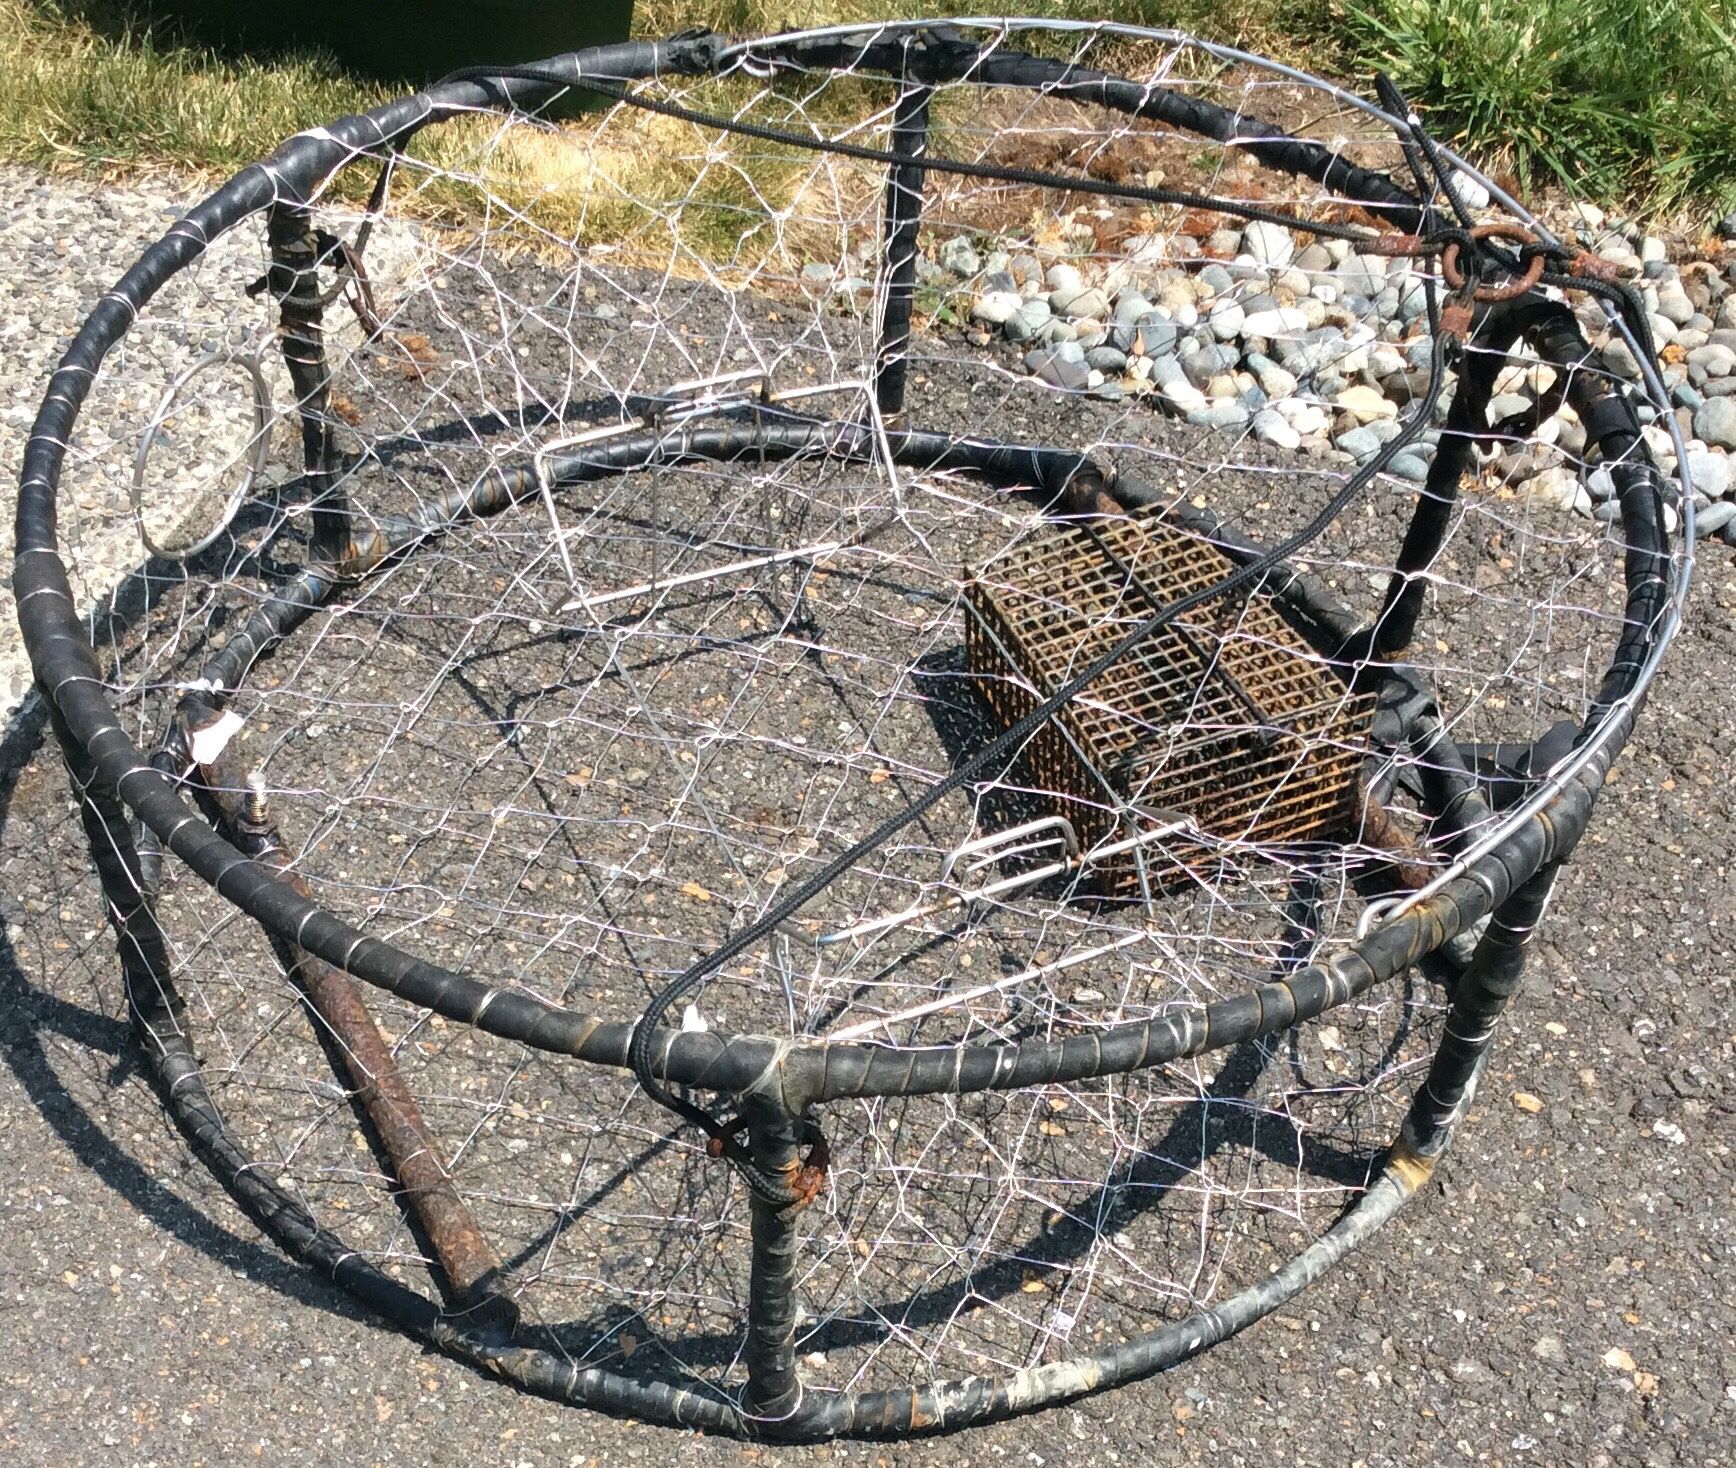 Used commercial crab pot heavy duty trap for Sale in Snohomish, WA